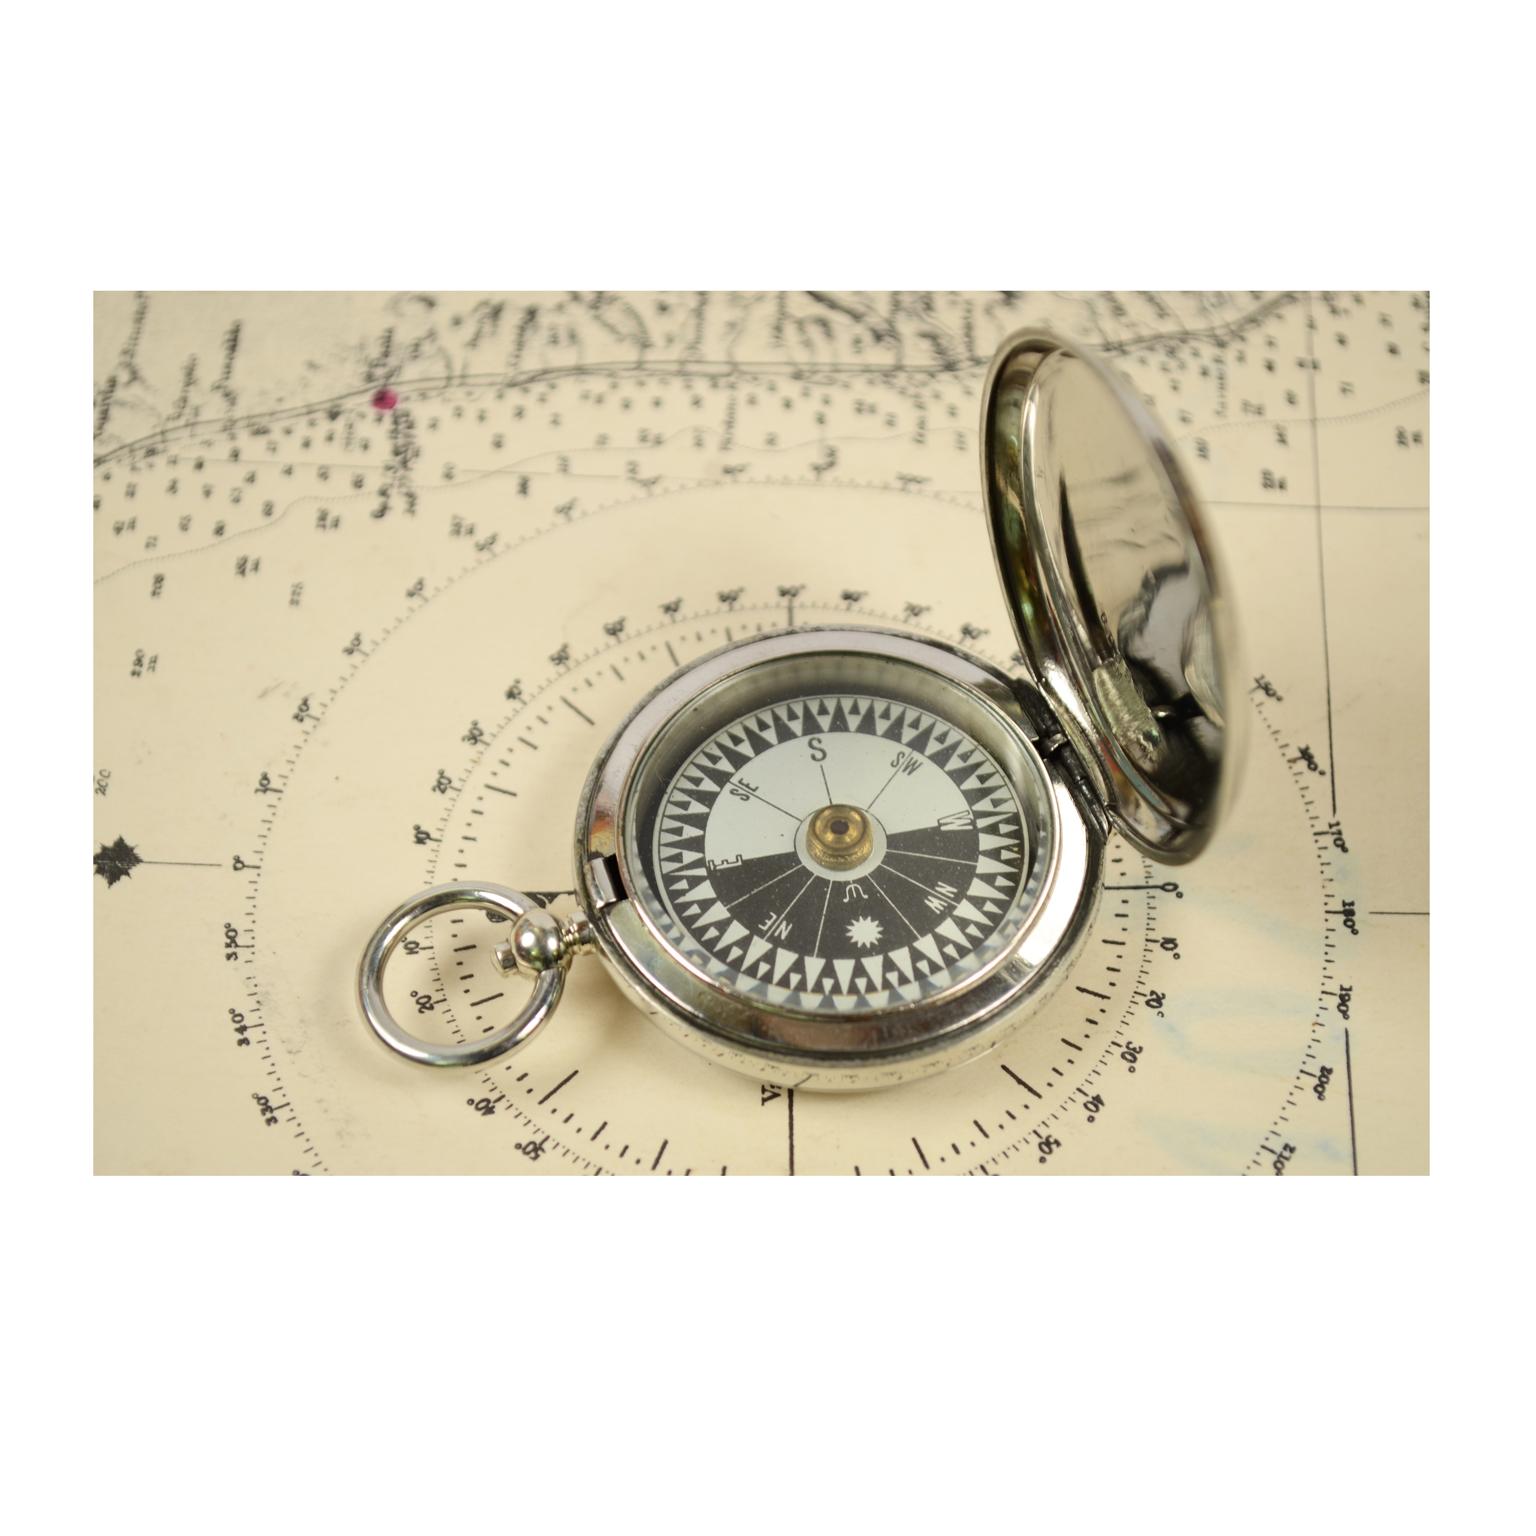 Pocket compass for the RAF officers, signed Short & Mason Ltd London 1916 V N 85058, made of chromed brass in the shape of a pocket watch. The compass has a snap-on cover with release button inside the ring. Twelve-winds compass card. Excellent